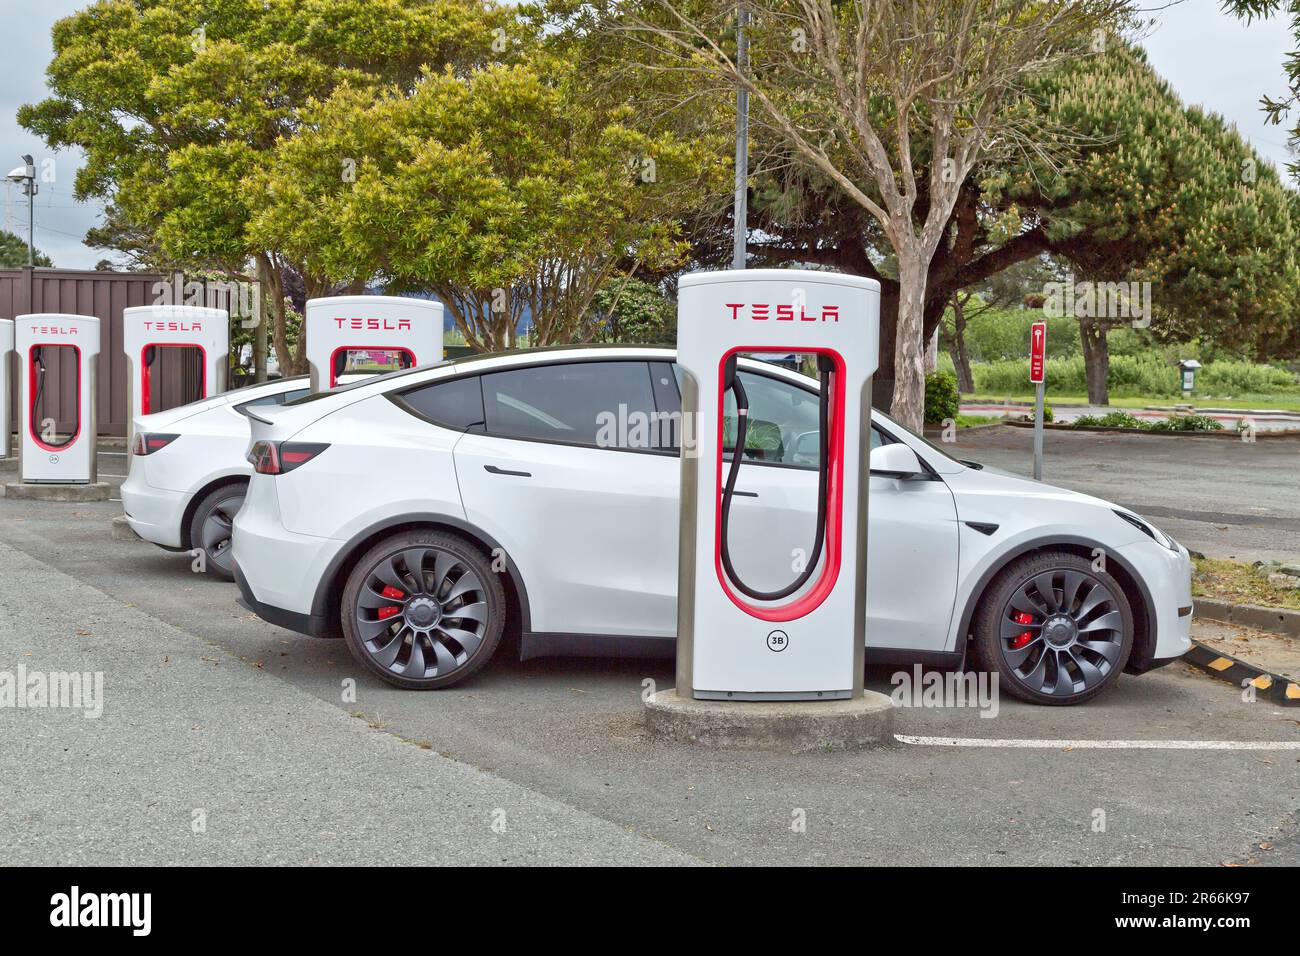 Tesla Supercharger Stations, converts 480V AC to 360V DC for the 'S' model, California West Coast. Stock Photo